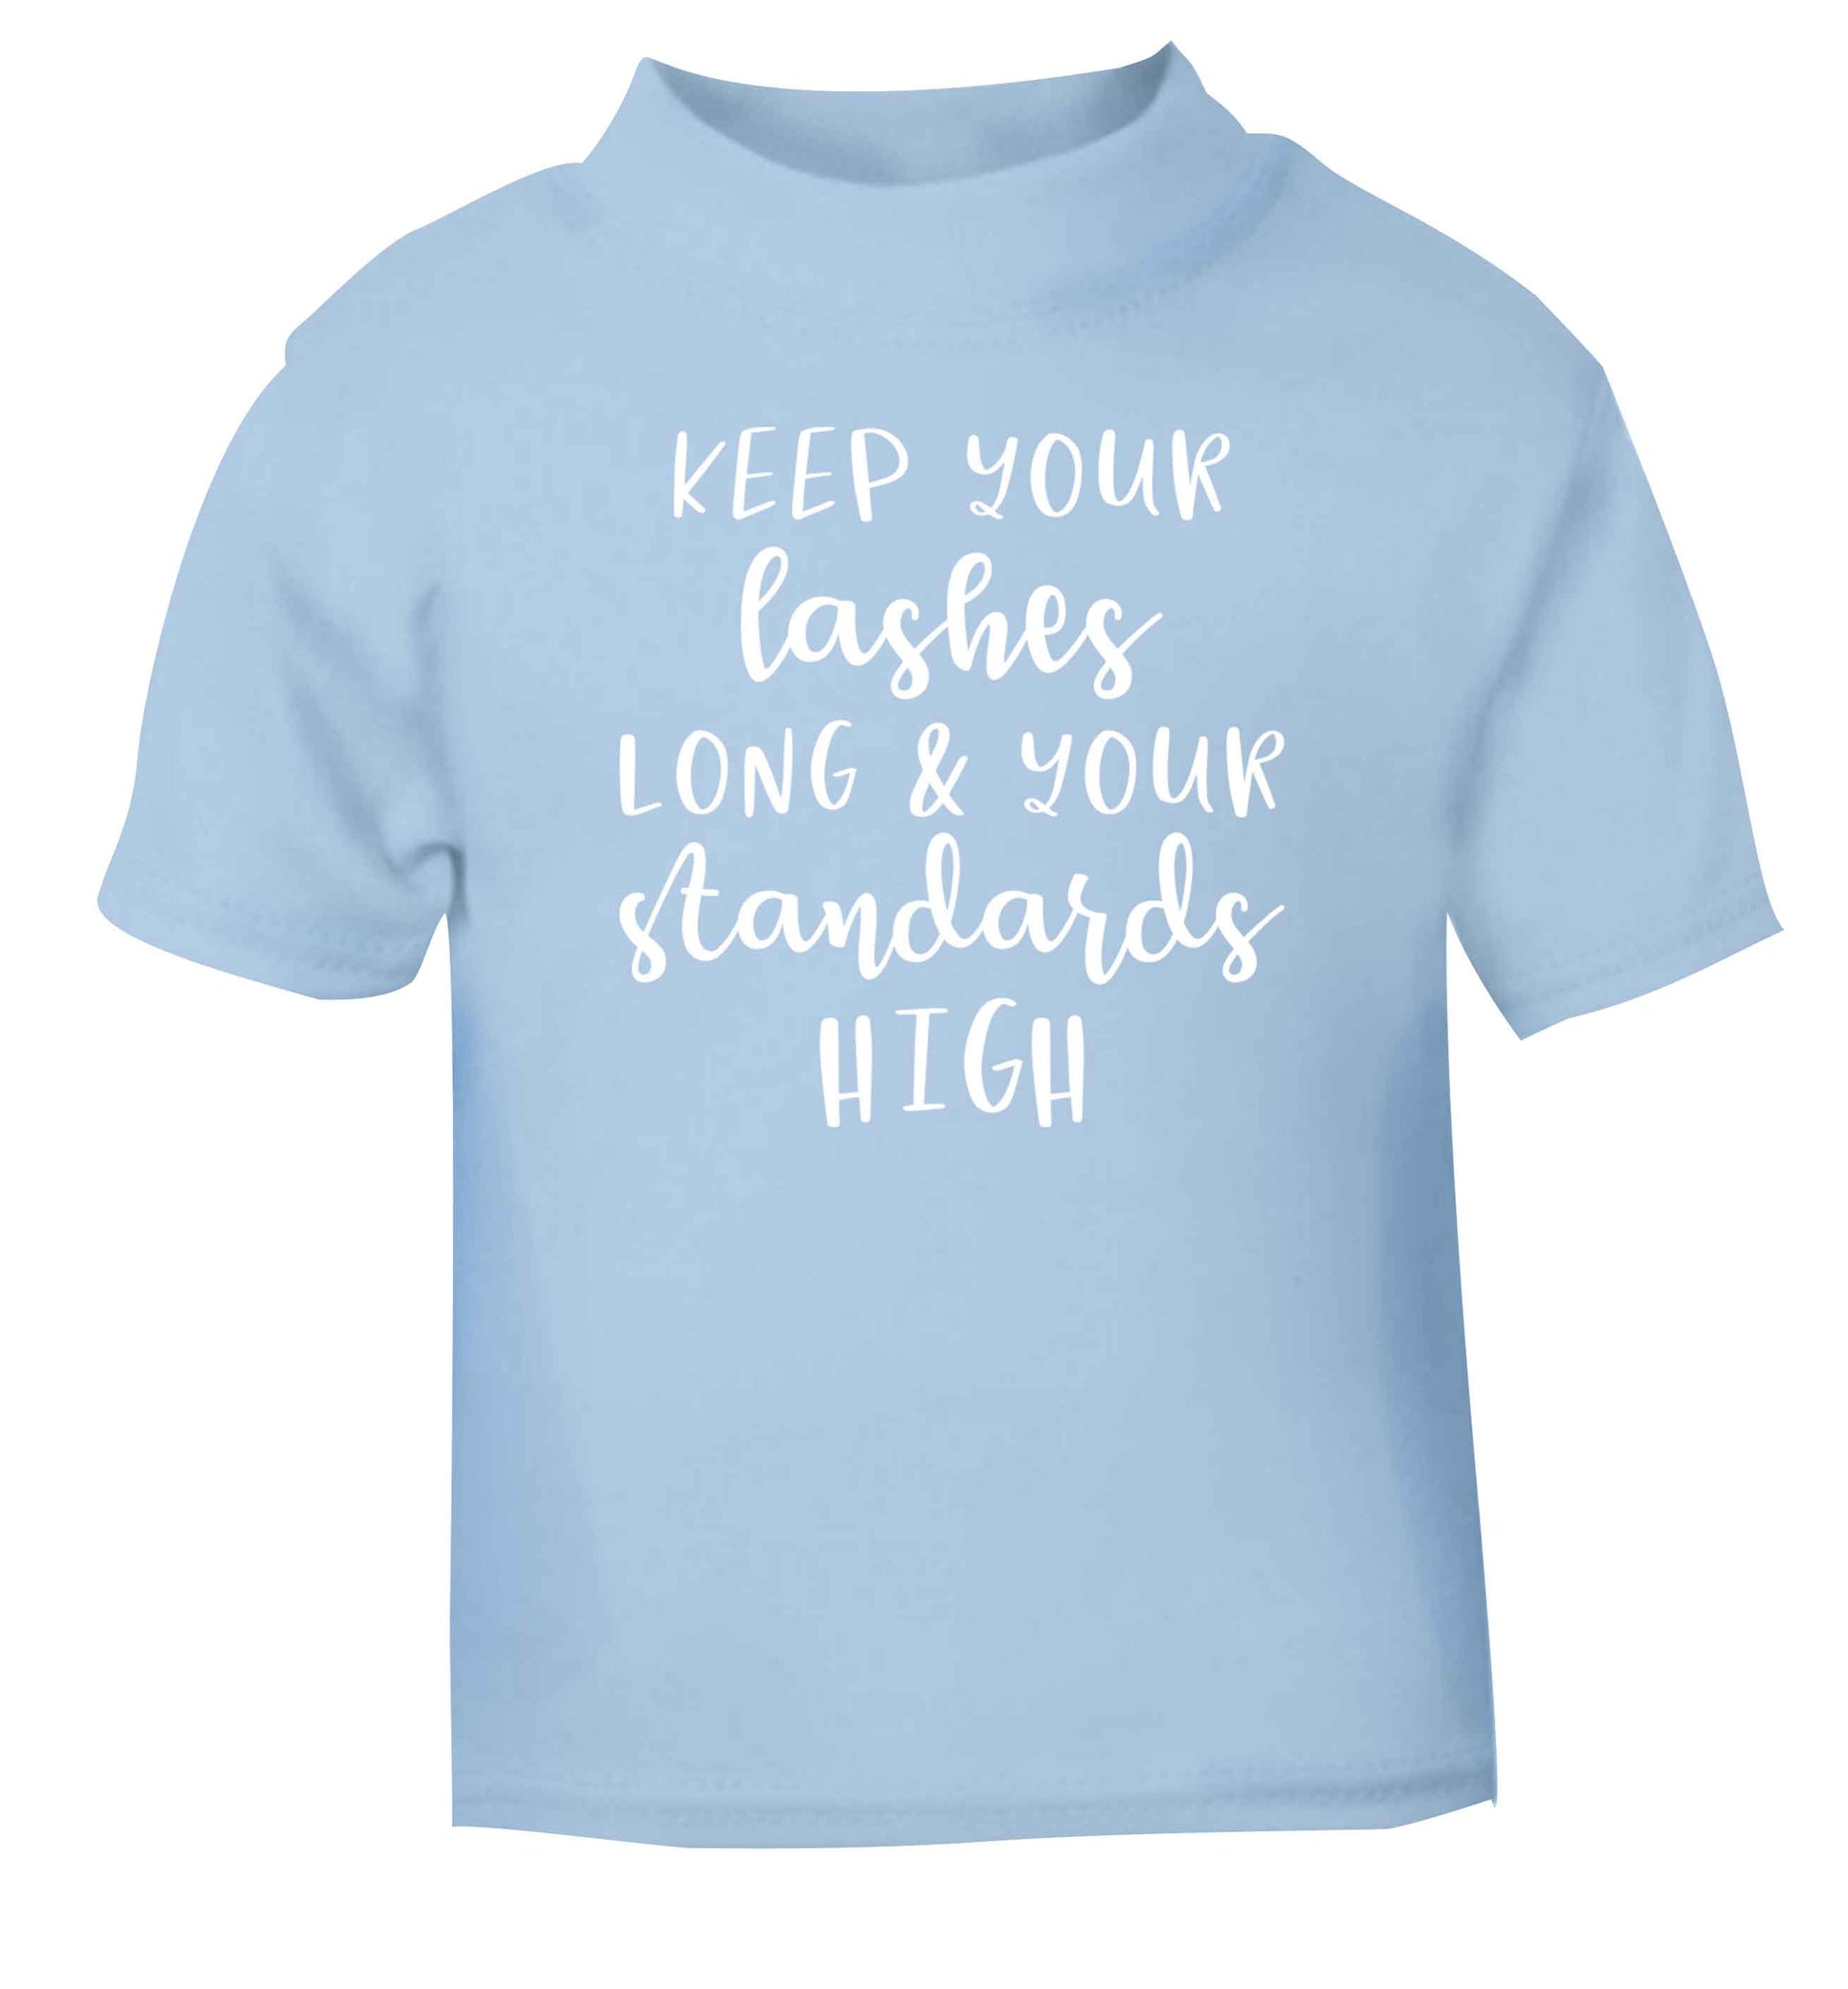 Keep your lashes long and your standards high light blue Baby Toddler Tshirt 2 Years